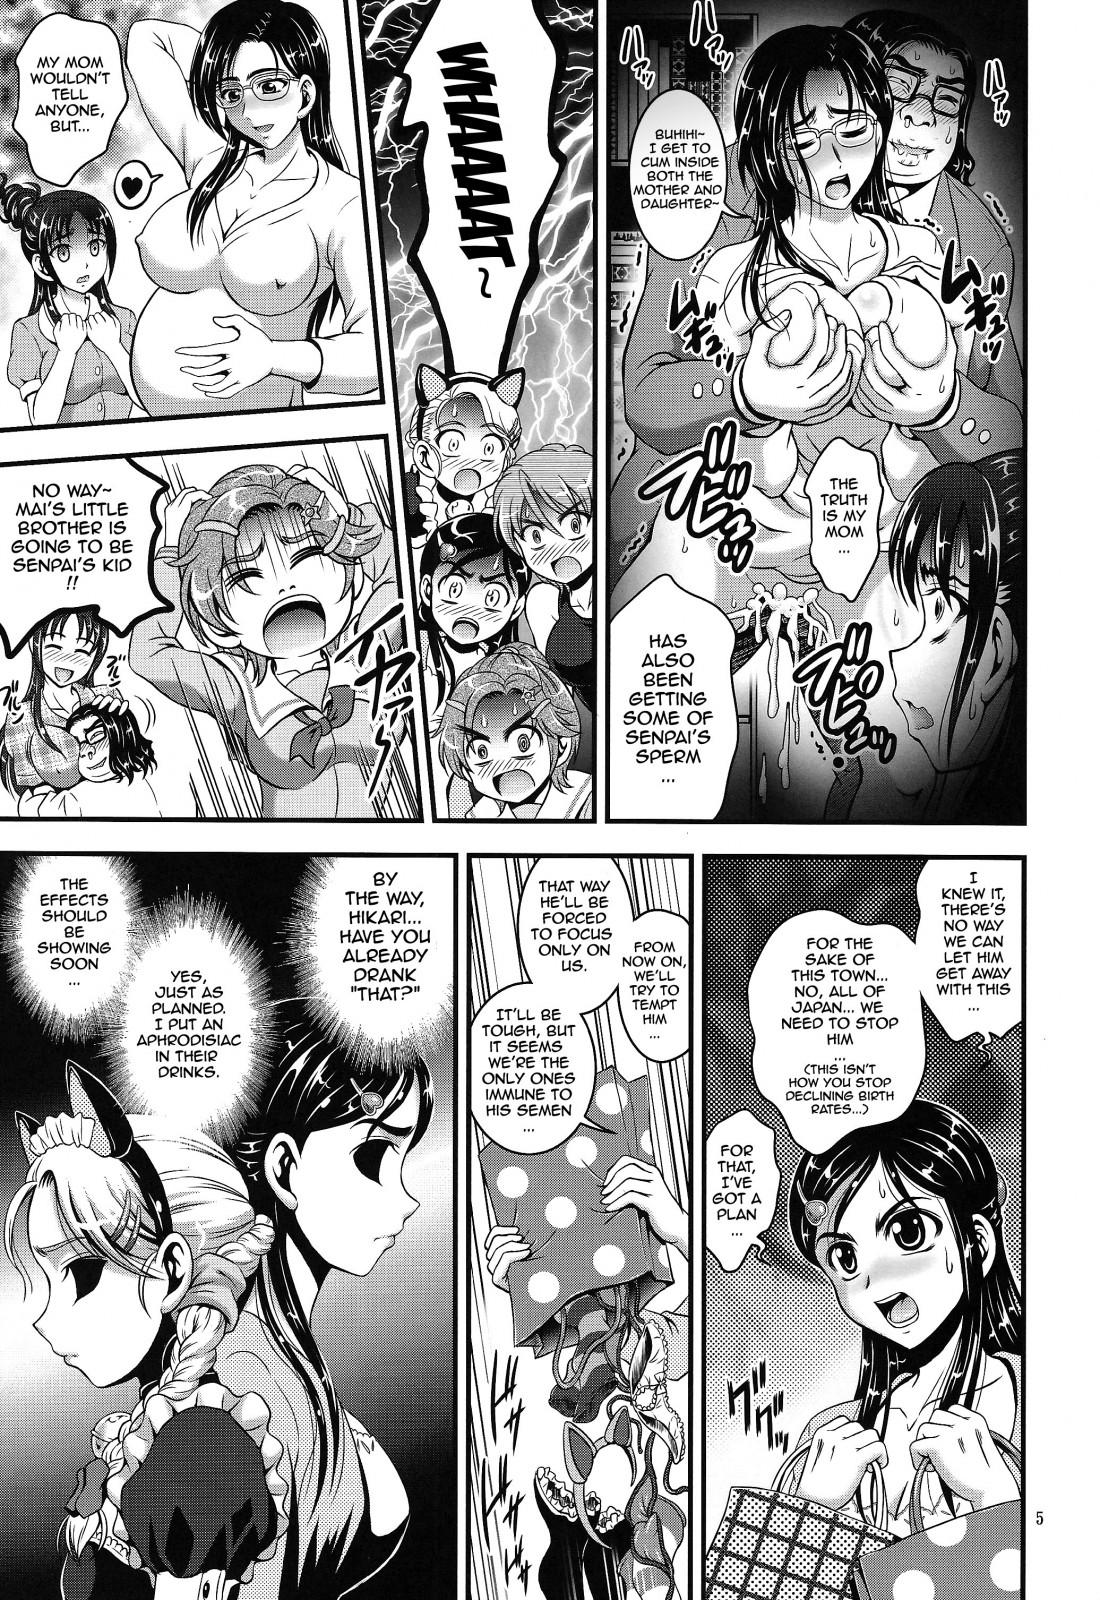 Sislovesme Ore Yome Ranking 1 | My Bride Ranking 1 - Pretty cure Sex Party - Page 6